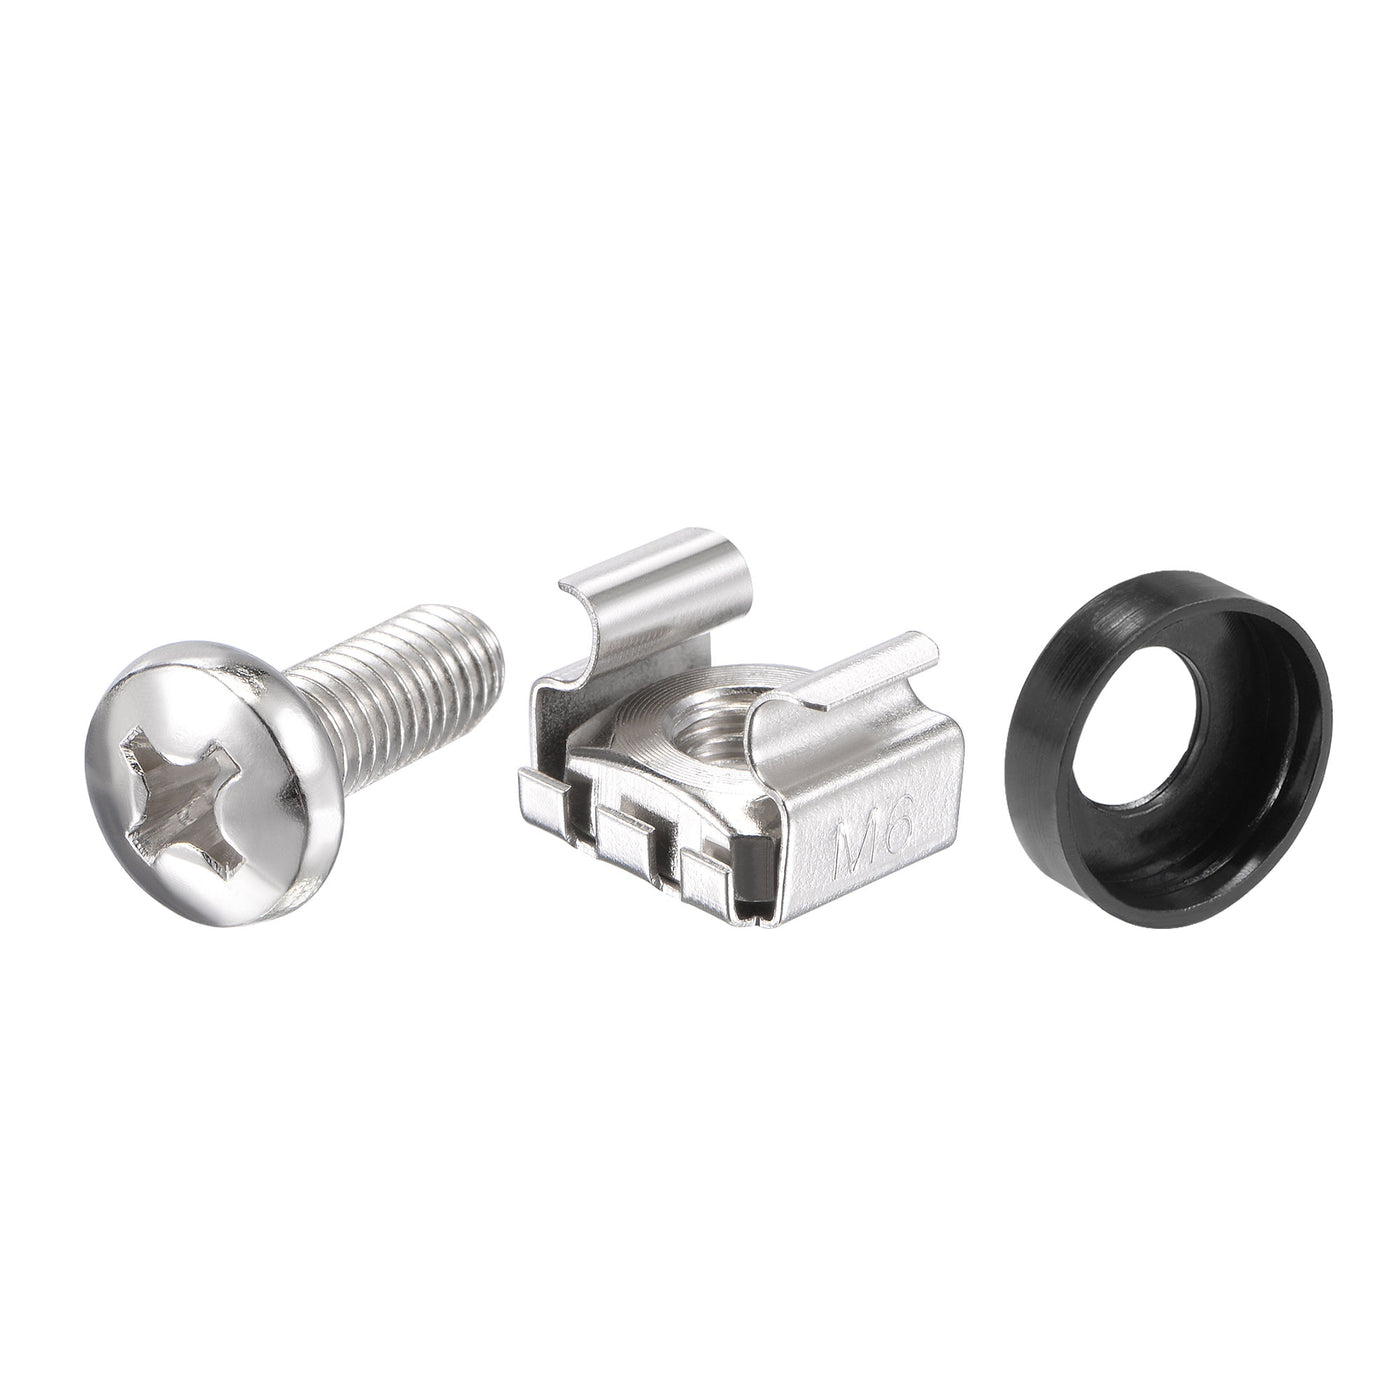 uxcell Uxcell M6x16mm Server Rack Cage Nuts Silver Tone 10Set, Mounting Screws for Server Shelves